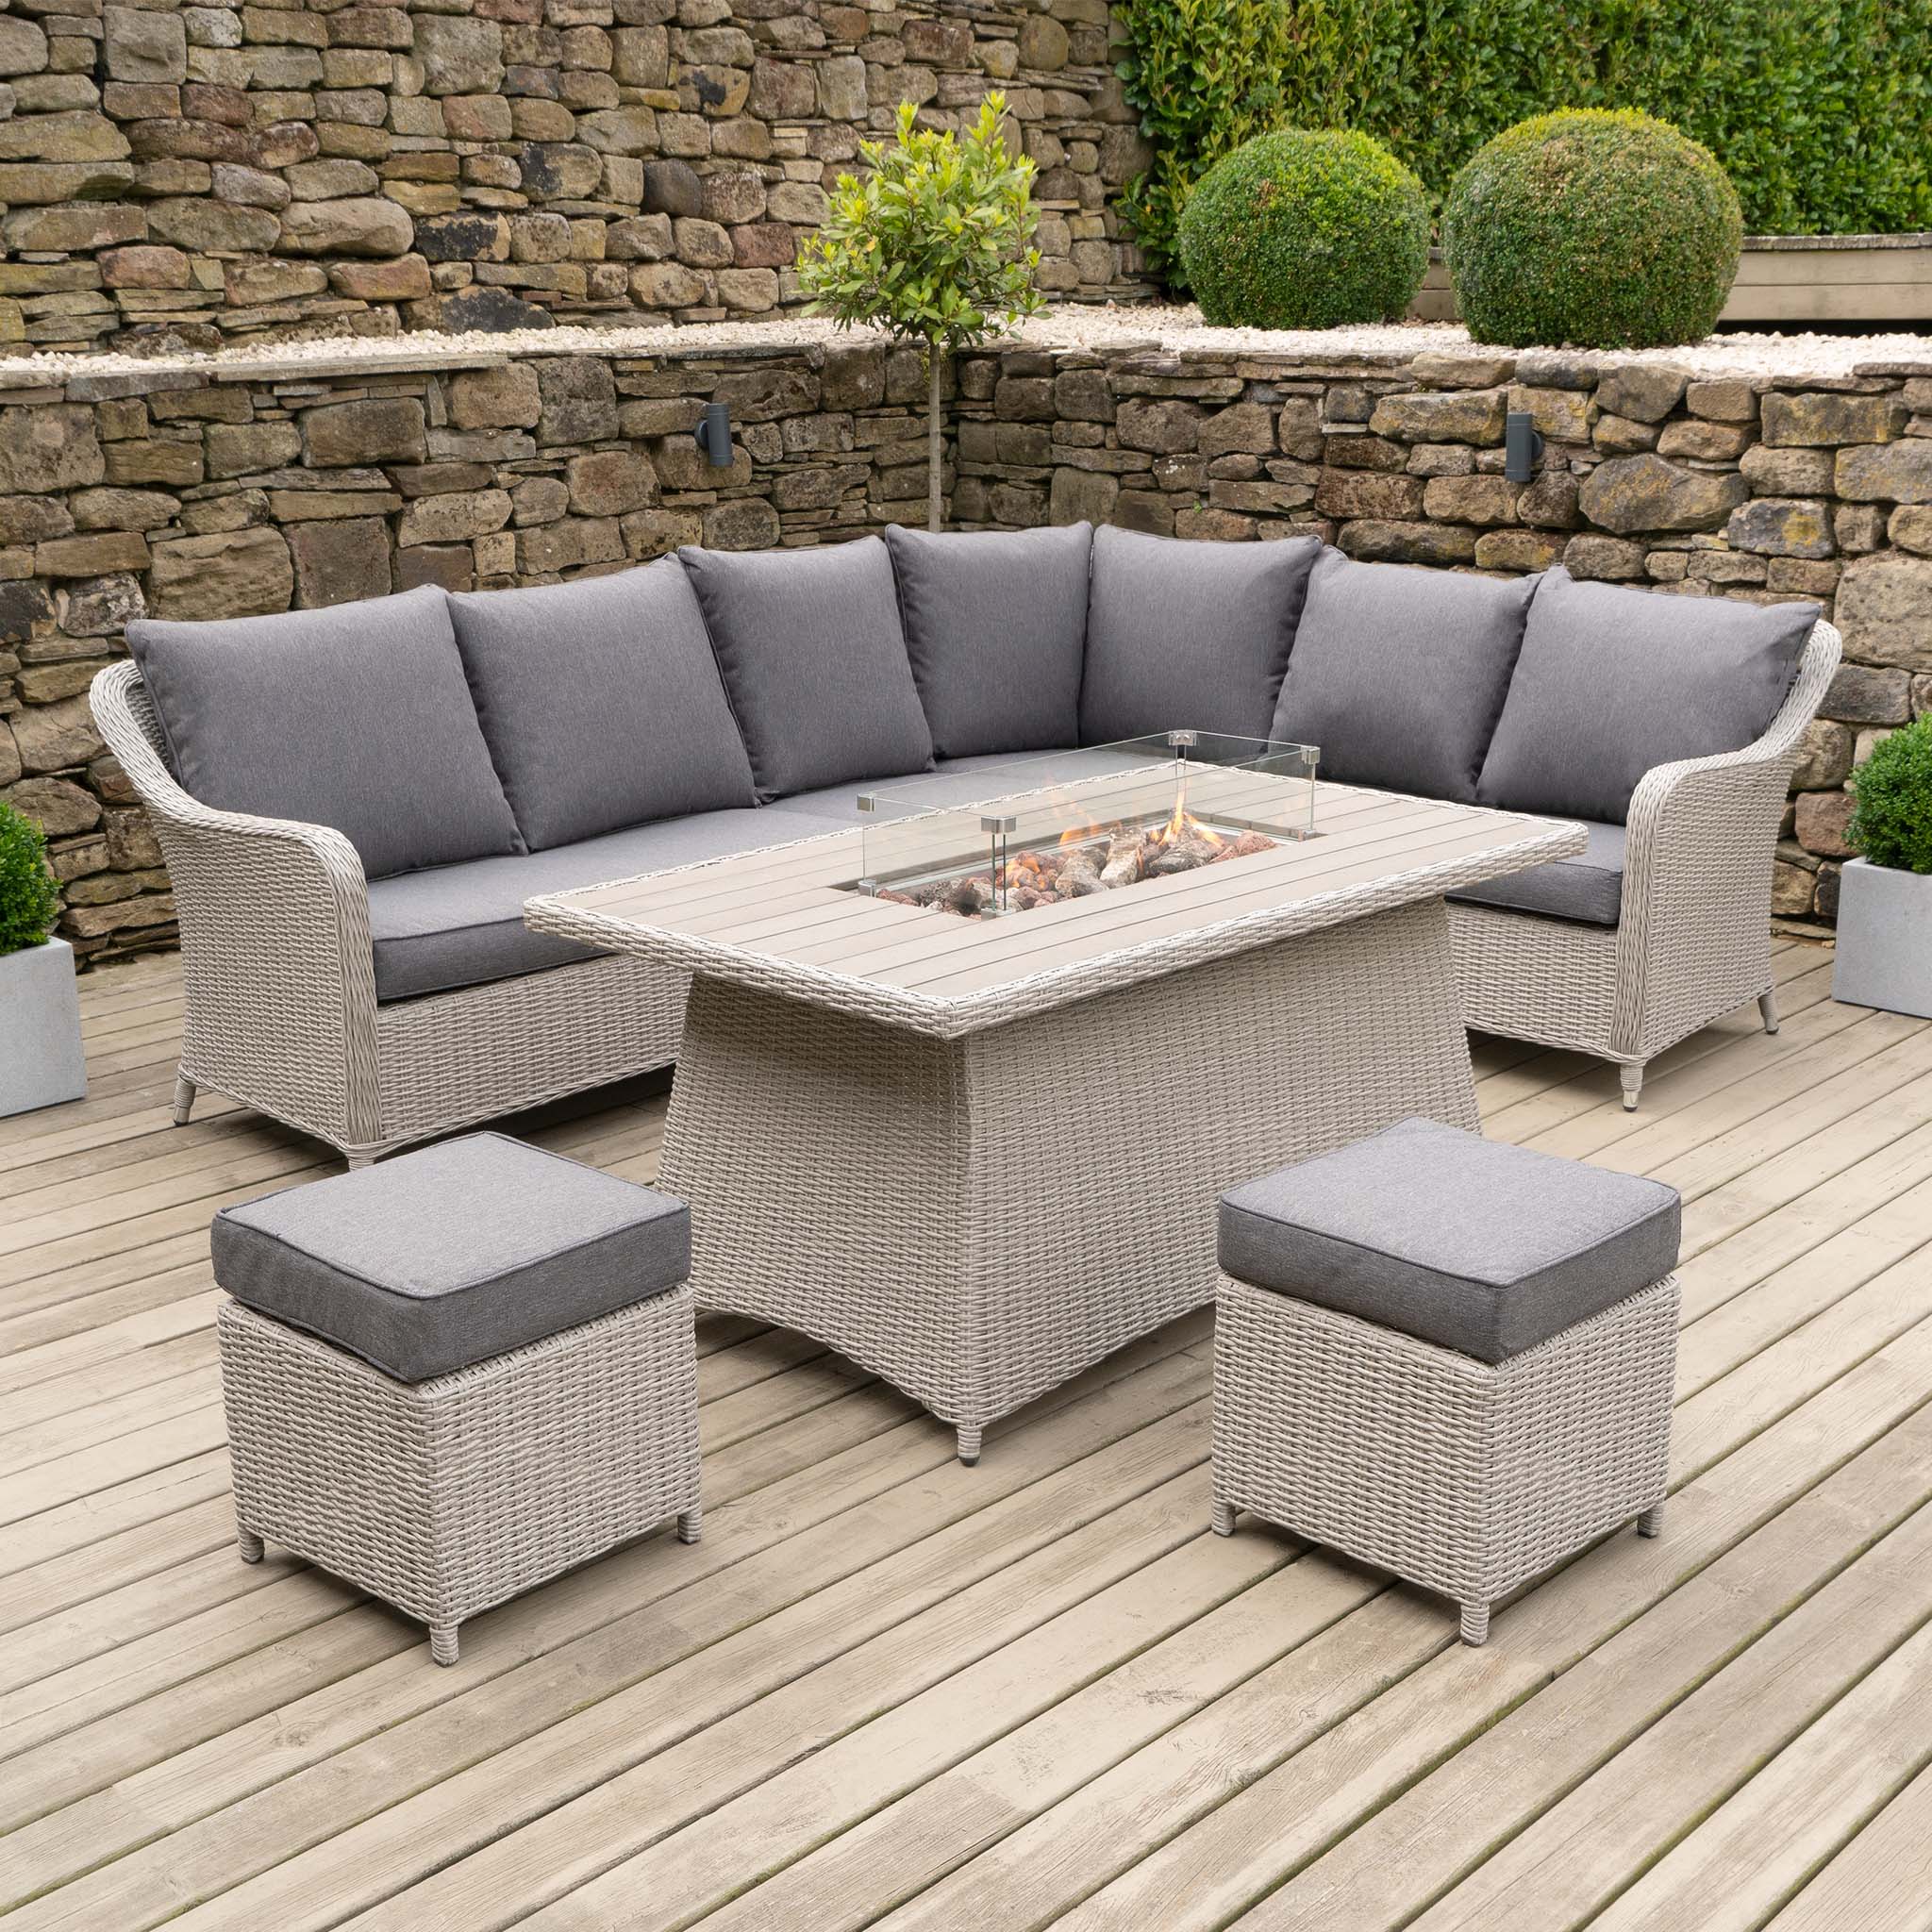 Antigua Rattan Corner Dining Set with Polywood Top & Firepit in Stone Grey